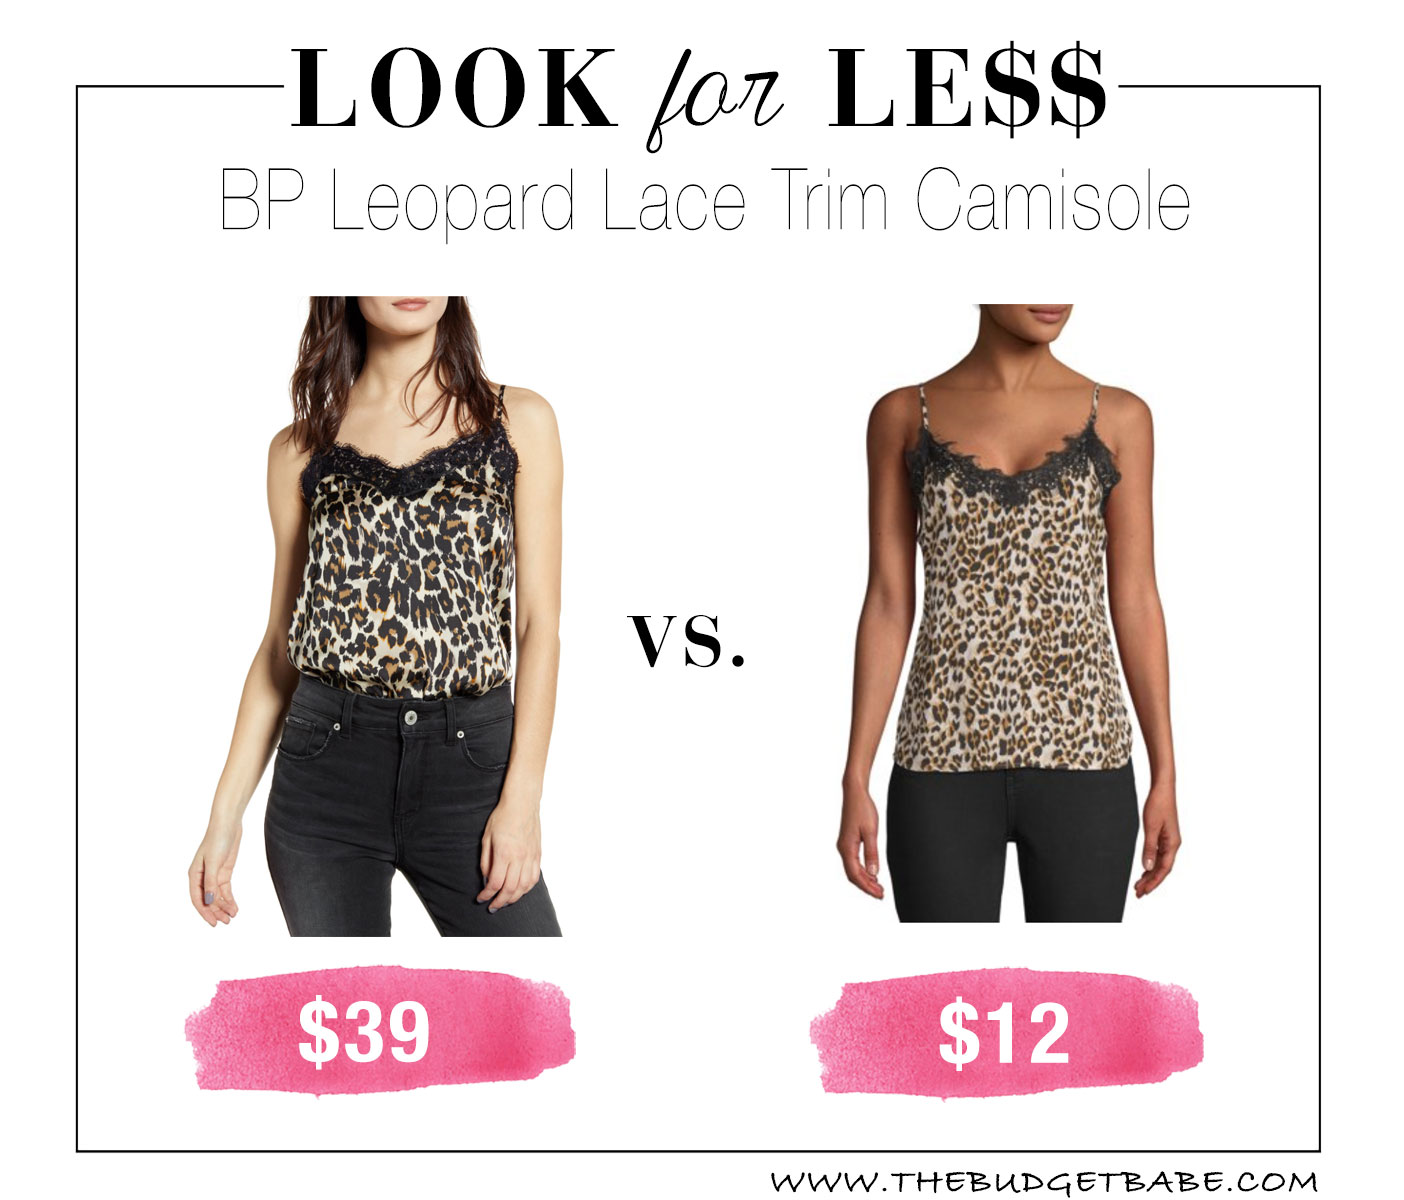 Nordstrom dupe! Leopard lace cami, great for layering